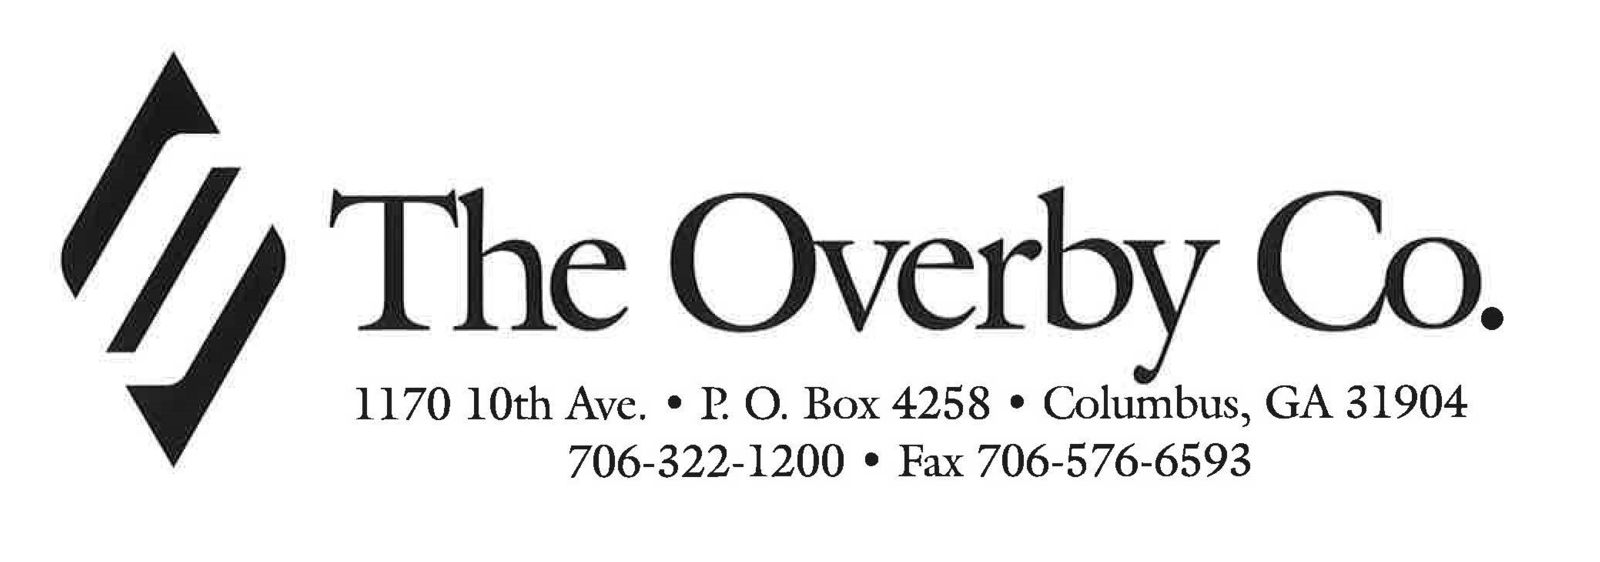 the overby company logo